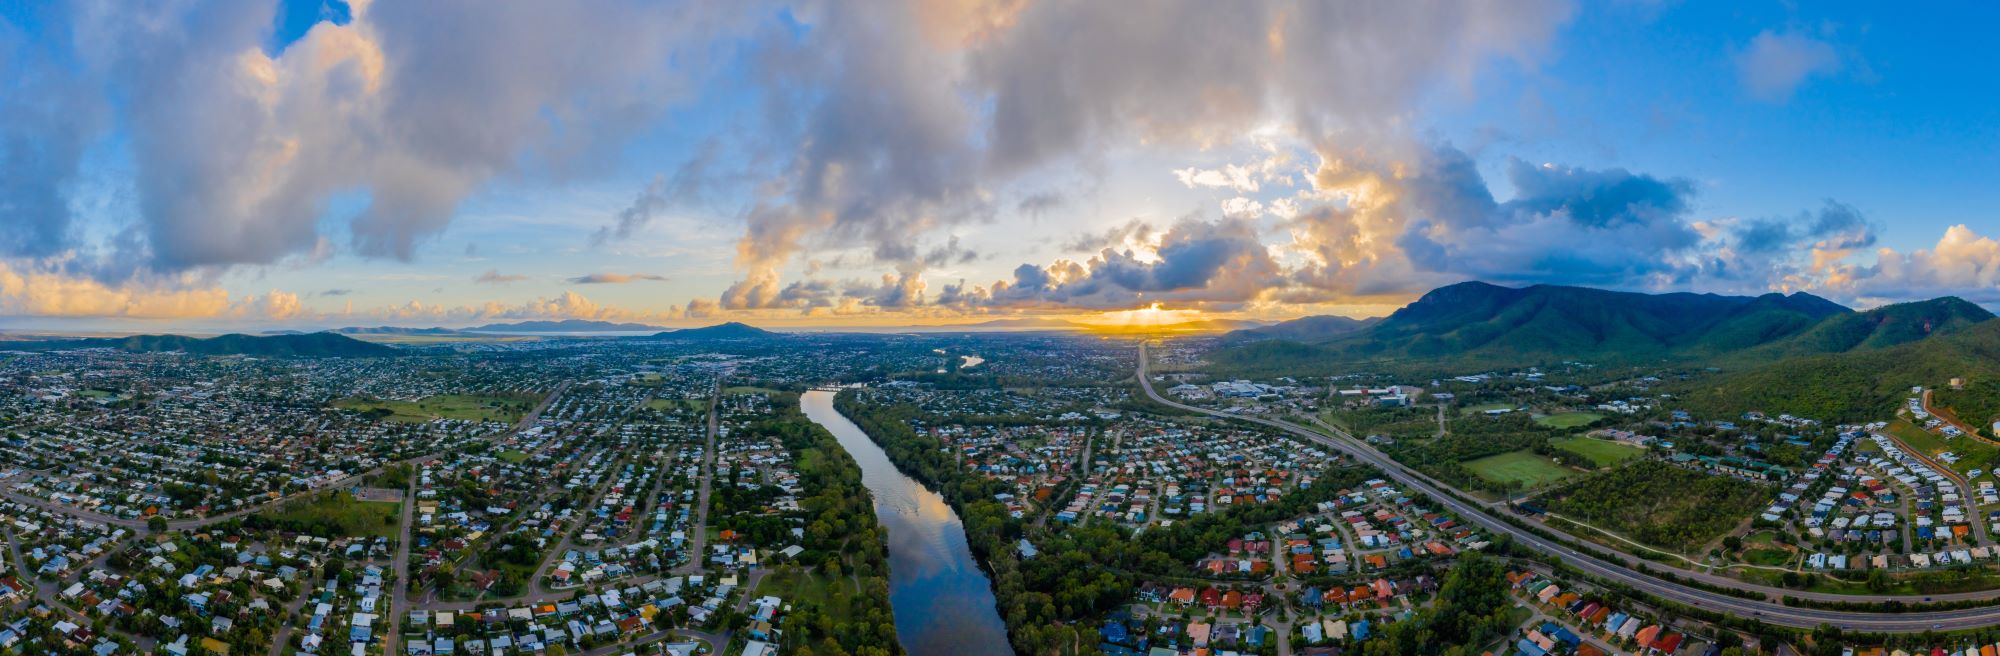 Aerial view of Townsville showing residential houses, river in the middle and mountains on the right